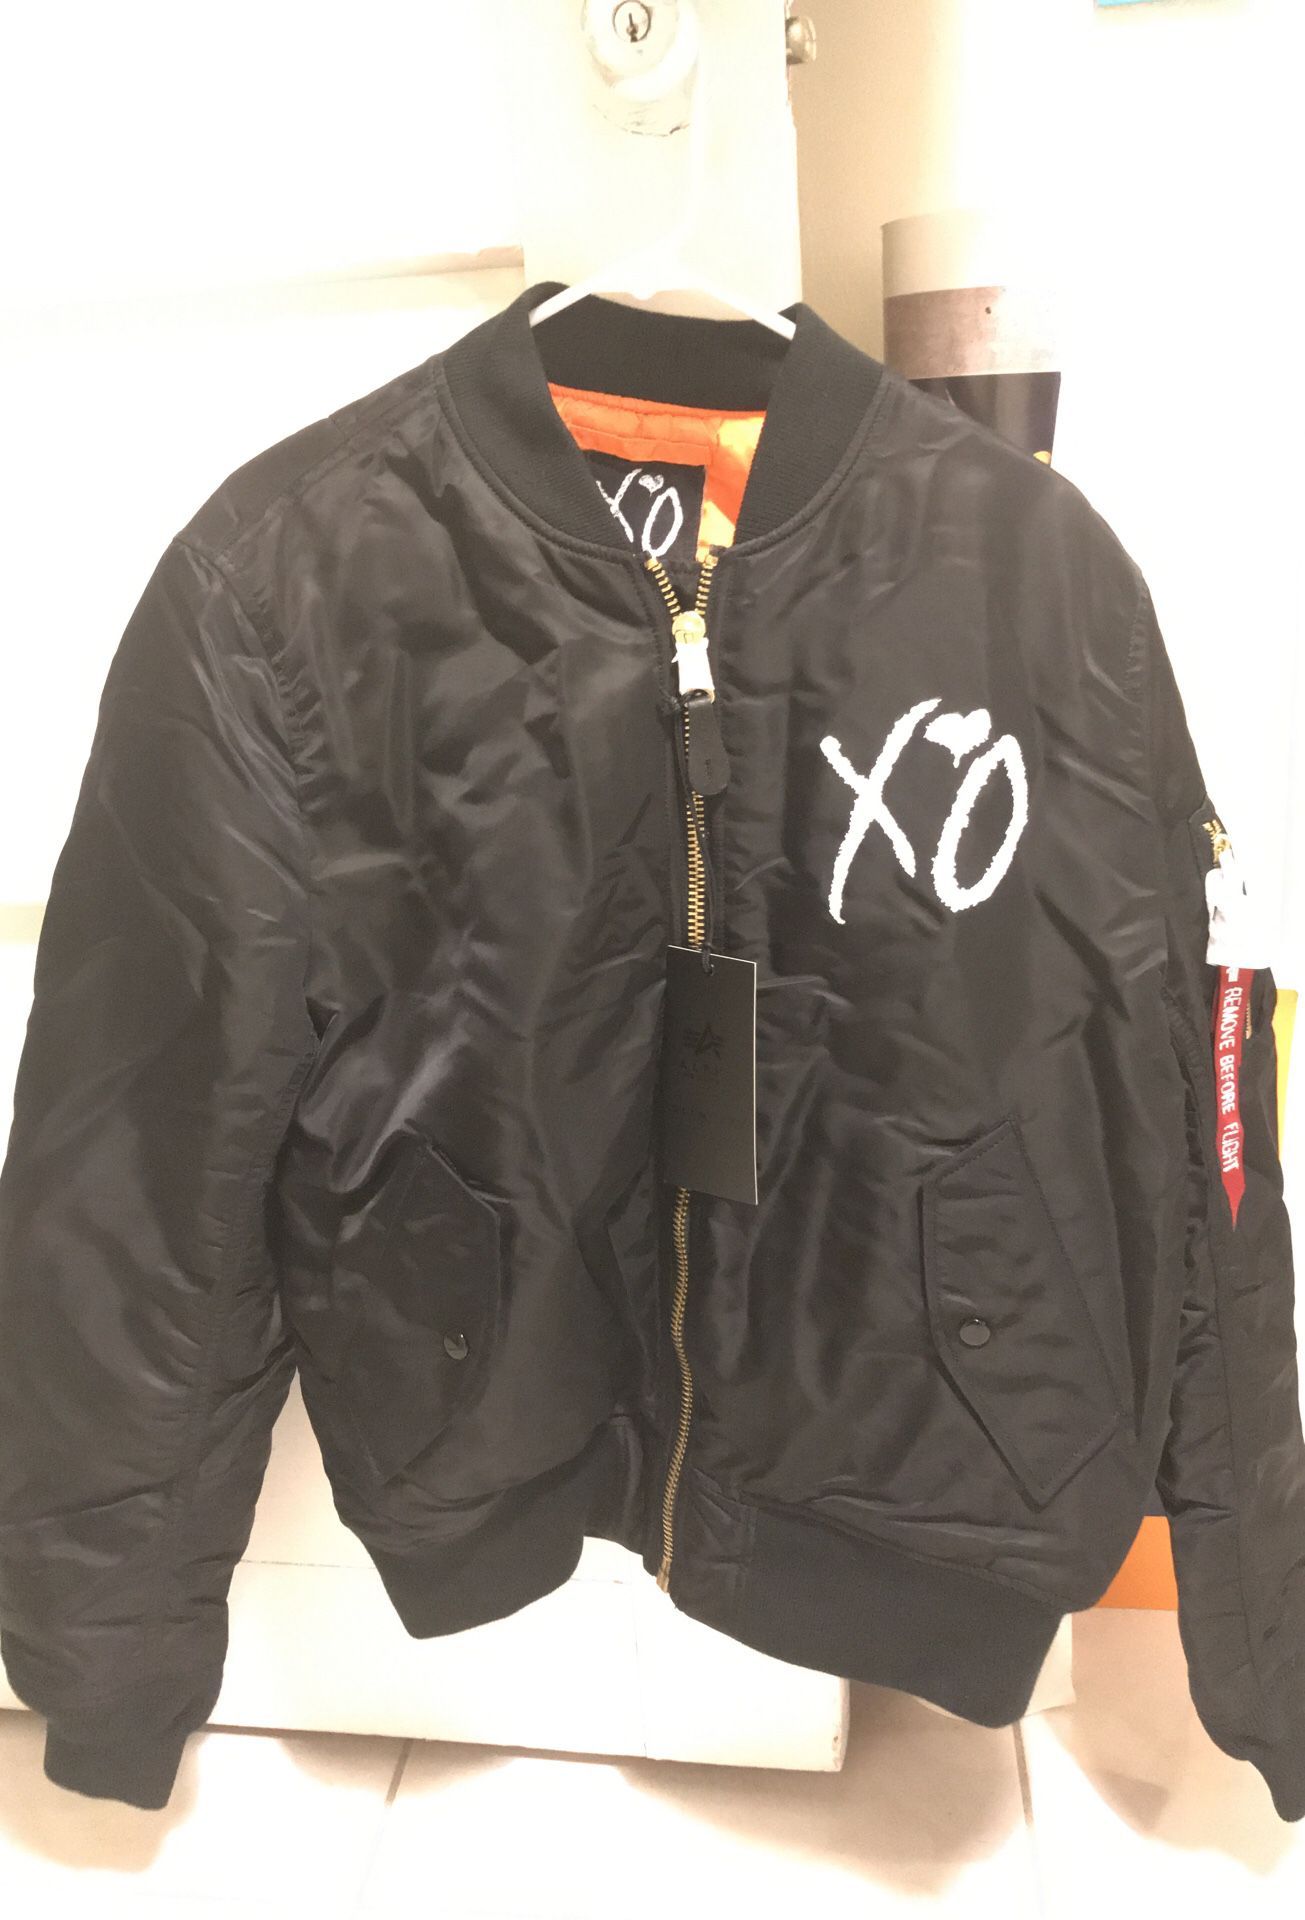 XO The Weeknd Starboy Panther Jacket